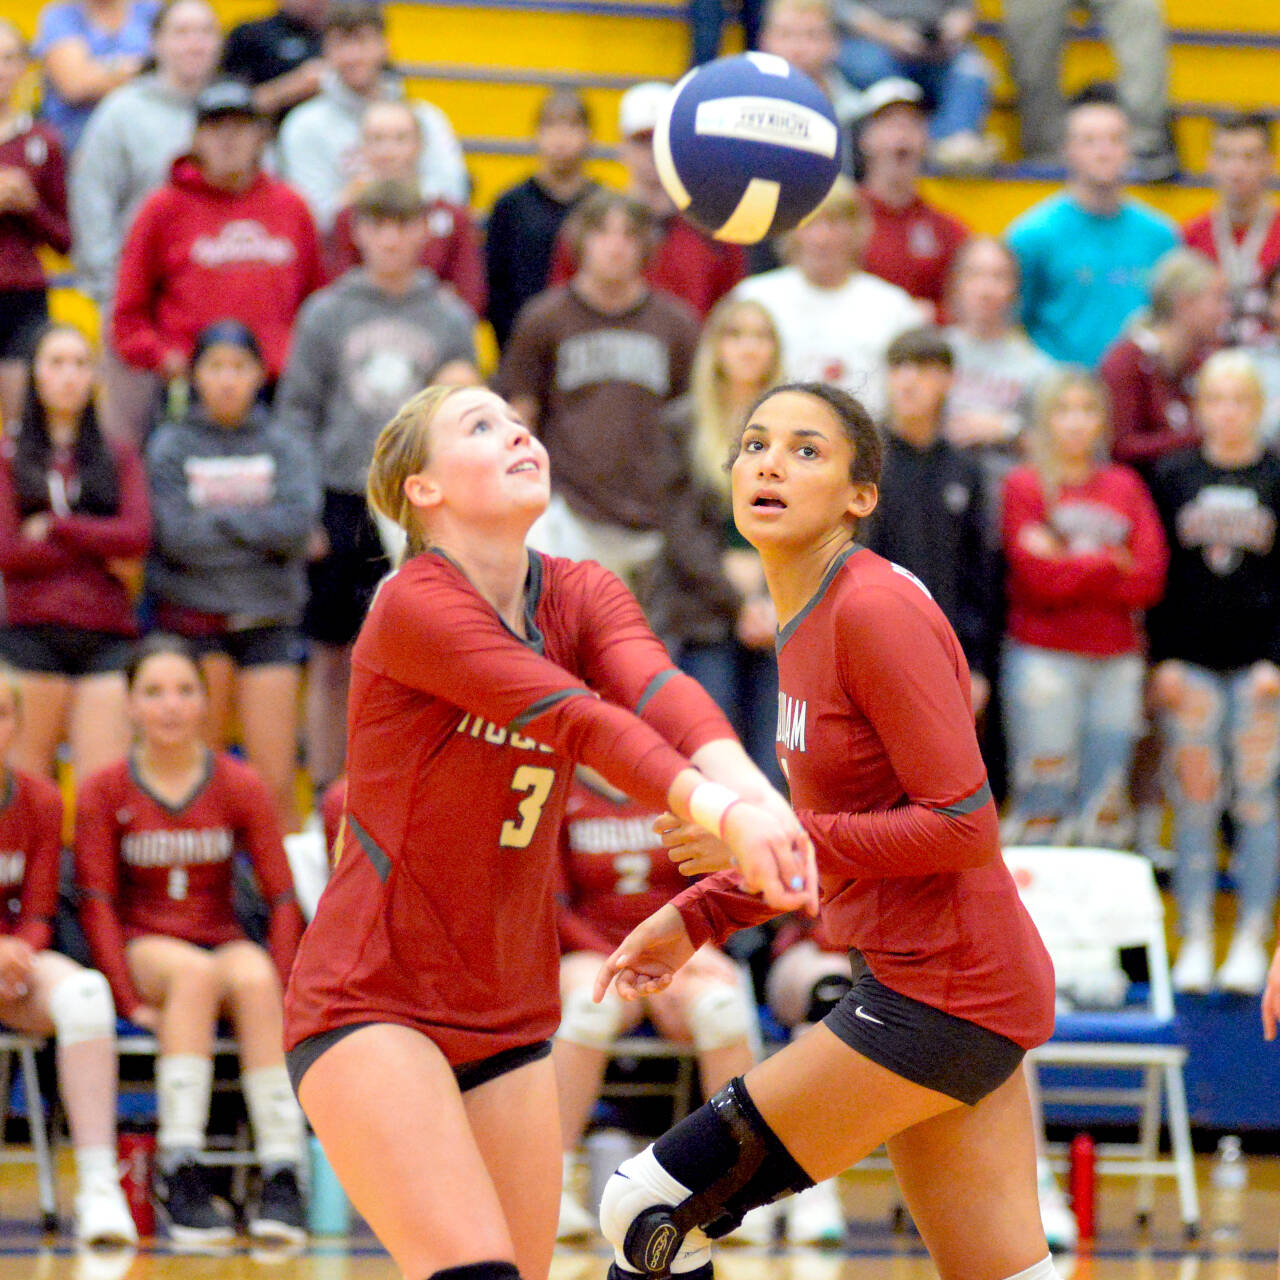 RYAN SPARKS | THE DAILY WORLD Hoquiam’s Ella Folkers (3) passes the ball while teammate Chloe Kennedy looks on during Hoquiam’s straight-set victory over Aberdeen on Tuesday, Sept. 13, 2022 at Sam Benn Gym in Aberdeen.